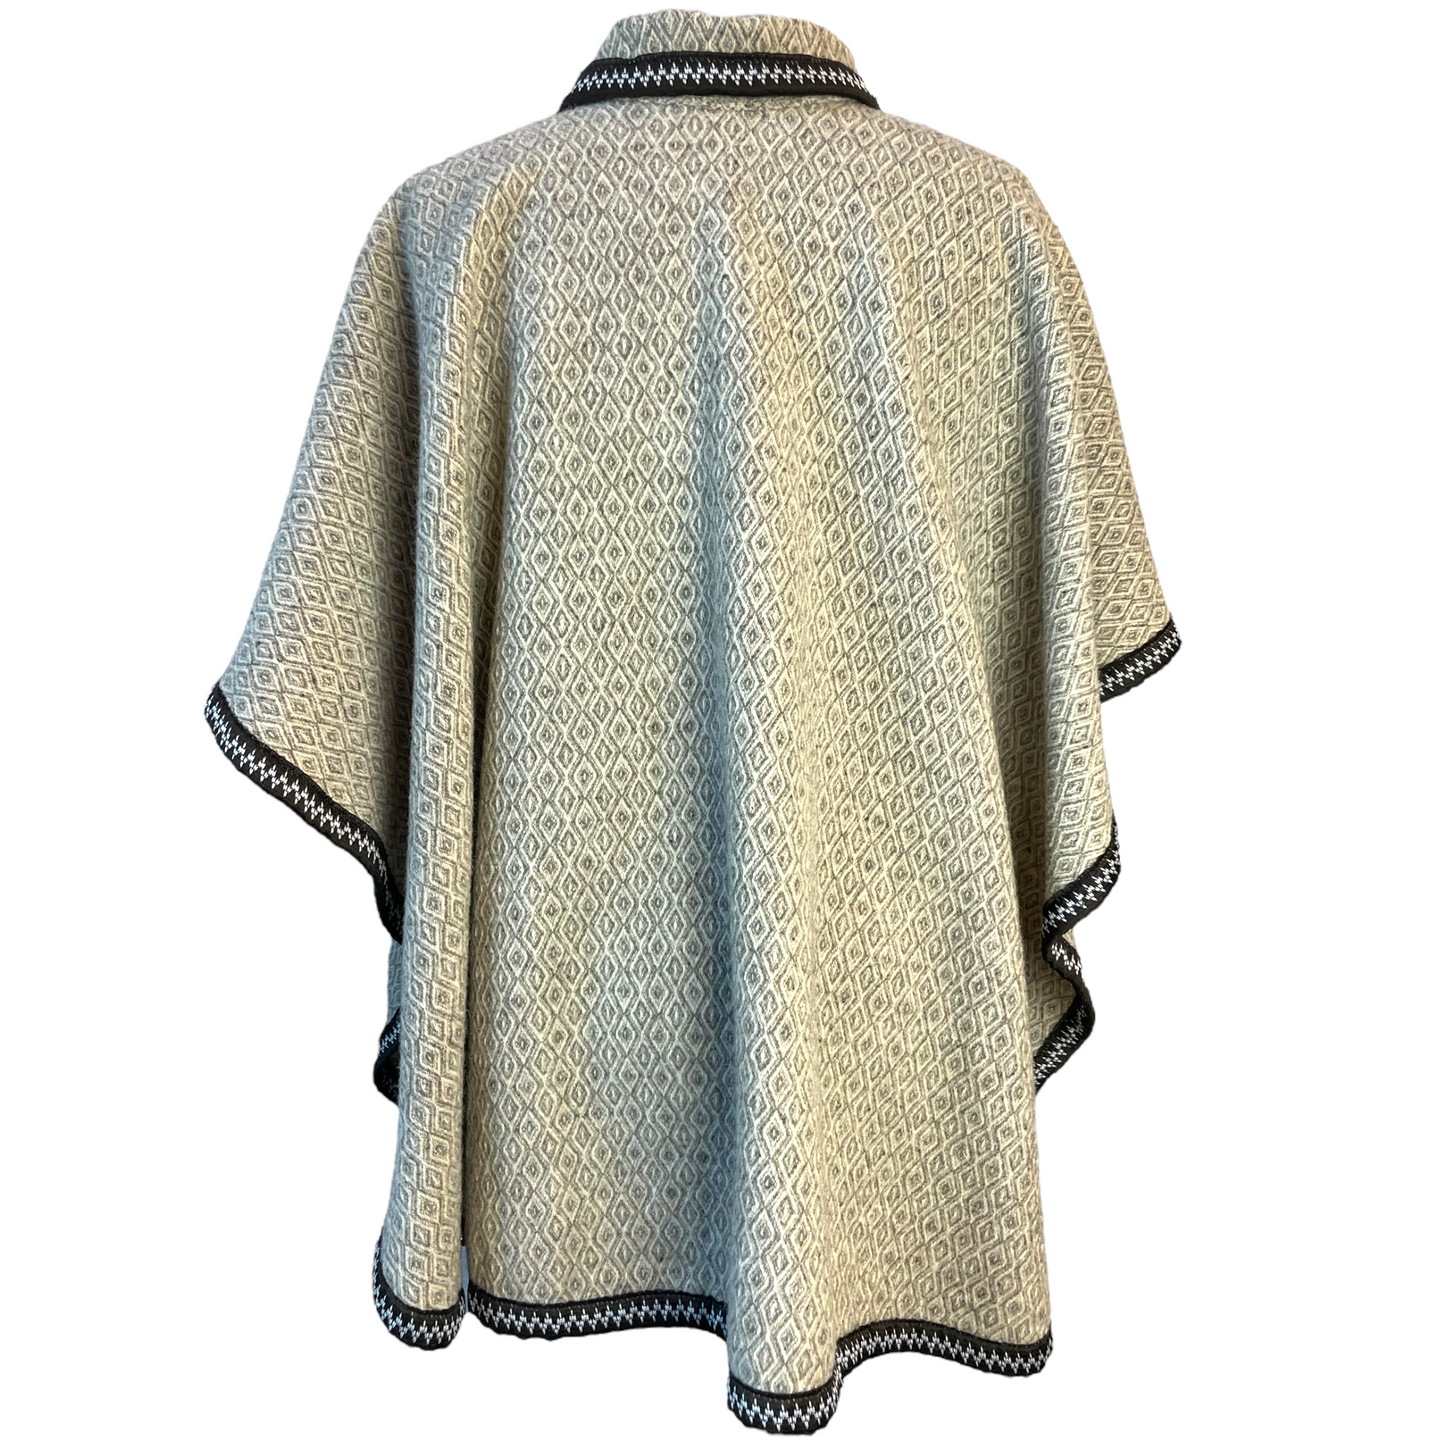 Vintage Handmade Button Up Poncho